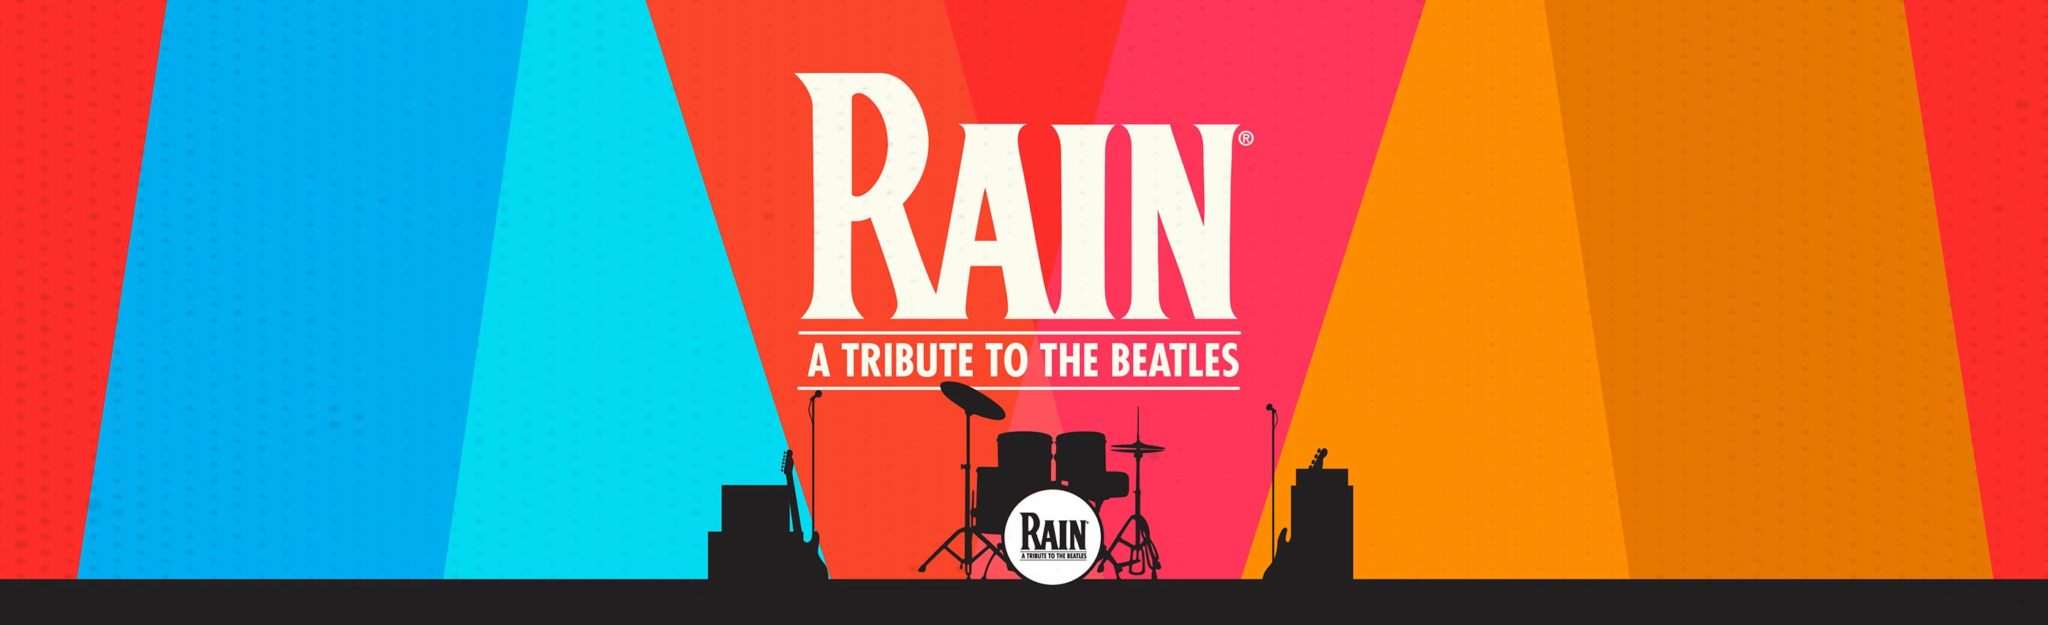 RAIN - a Tribute to The Beatles live at the KettleHouse Amphitheater in Bonner, Montana on Sunday, July 30, 2023